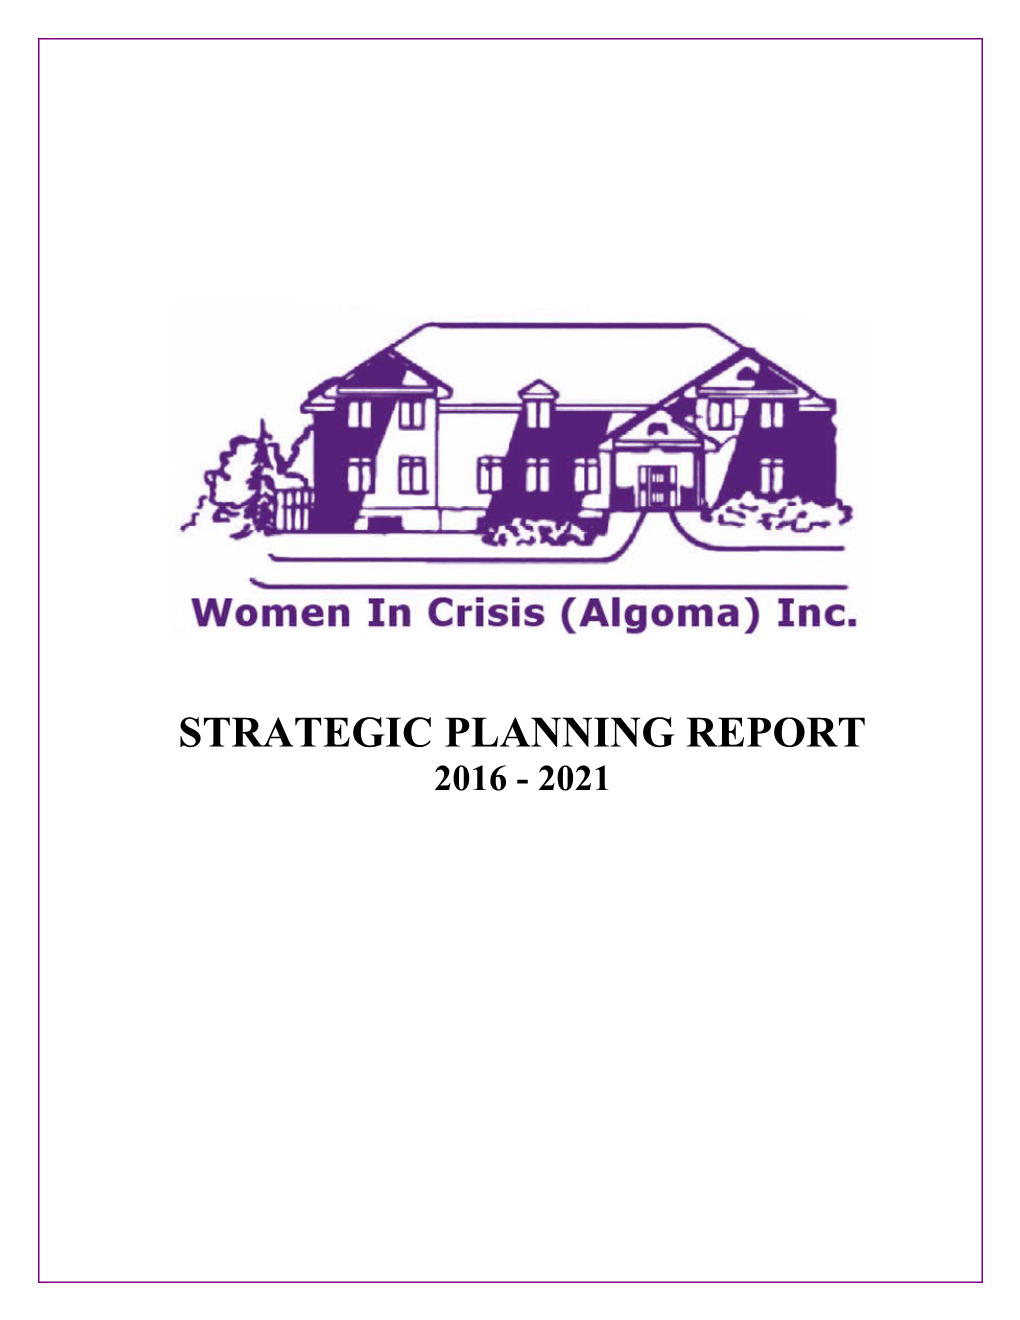 Sect 3 Part a Strategic Planning Report 2016 - 2021 (00008519;1)